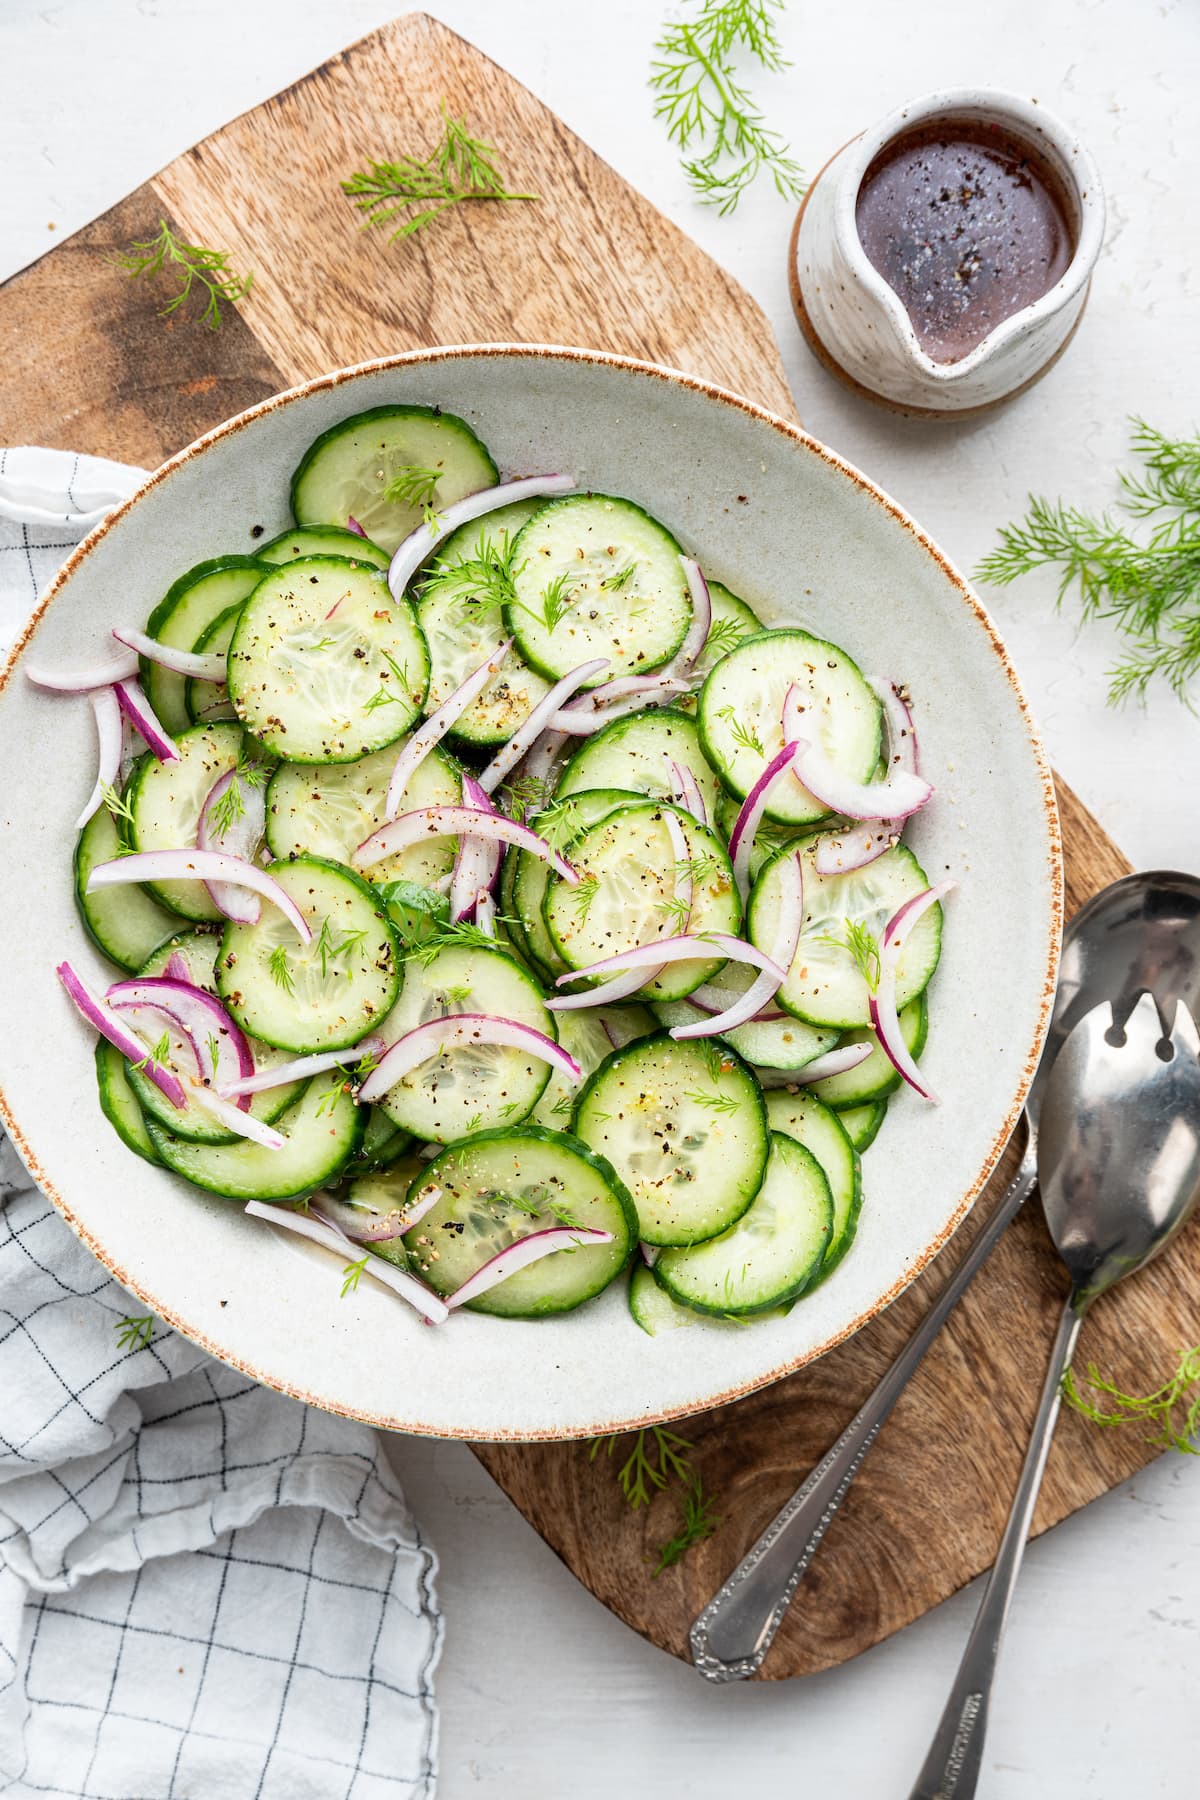 A cucumber salad in a large white bowl on a wood cutting board.